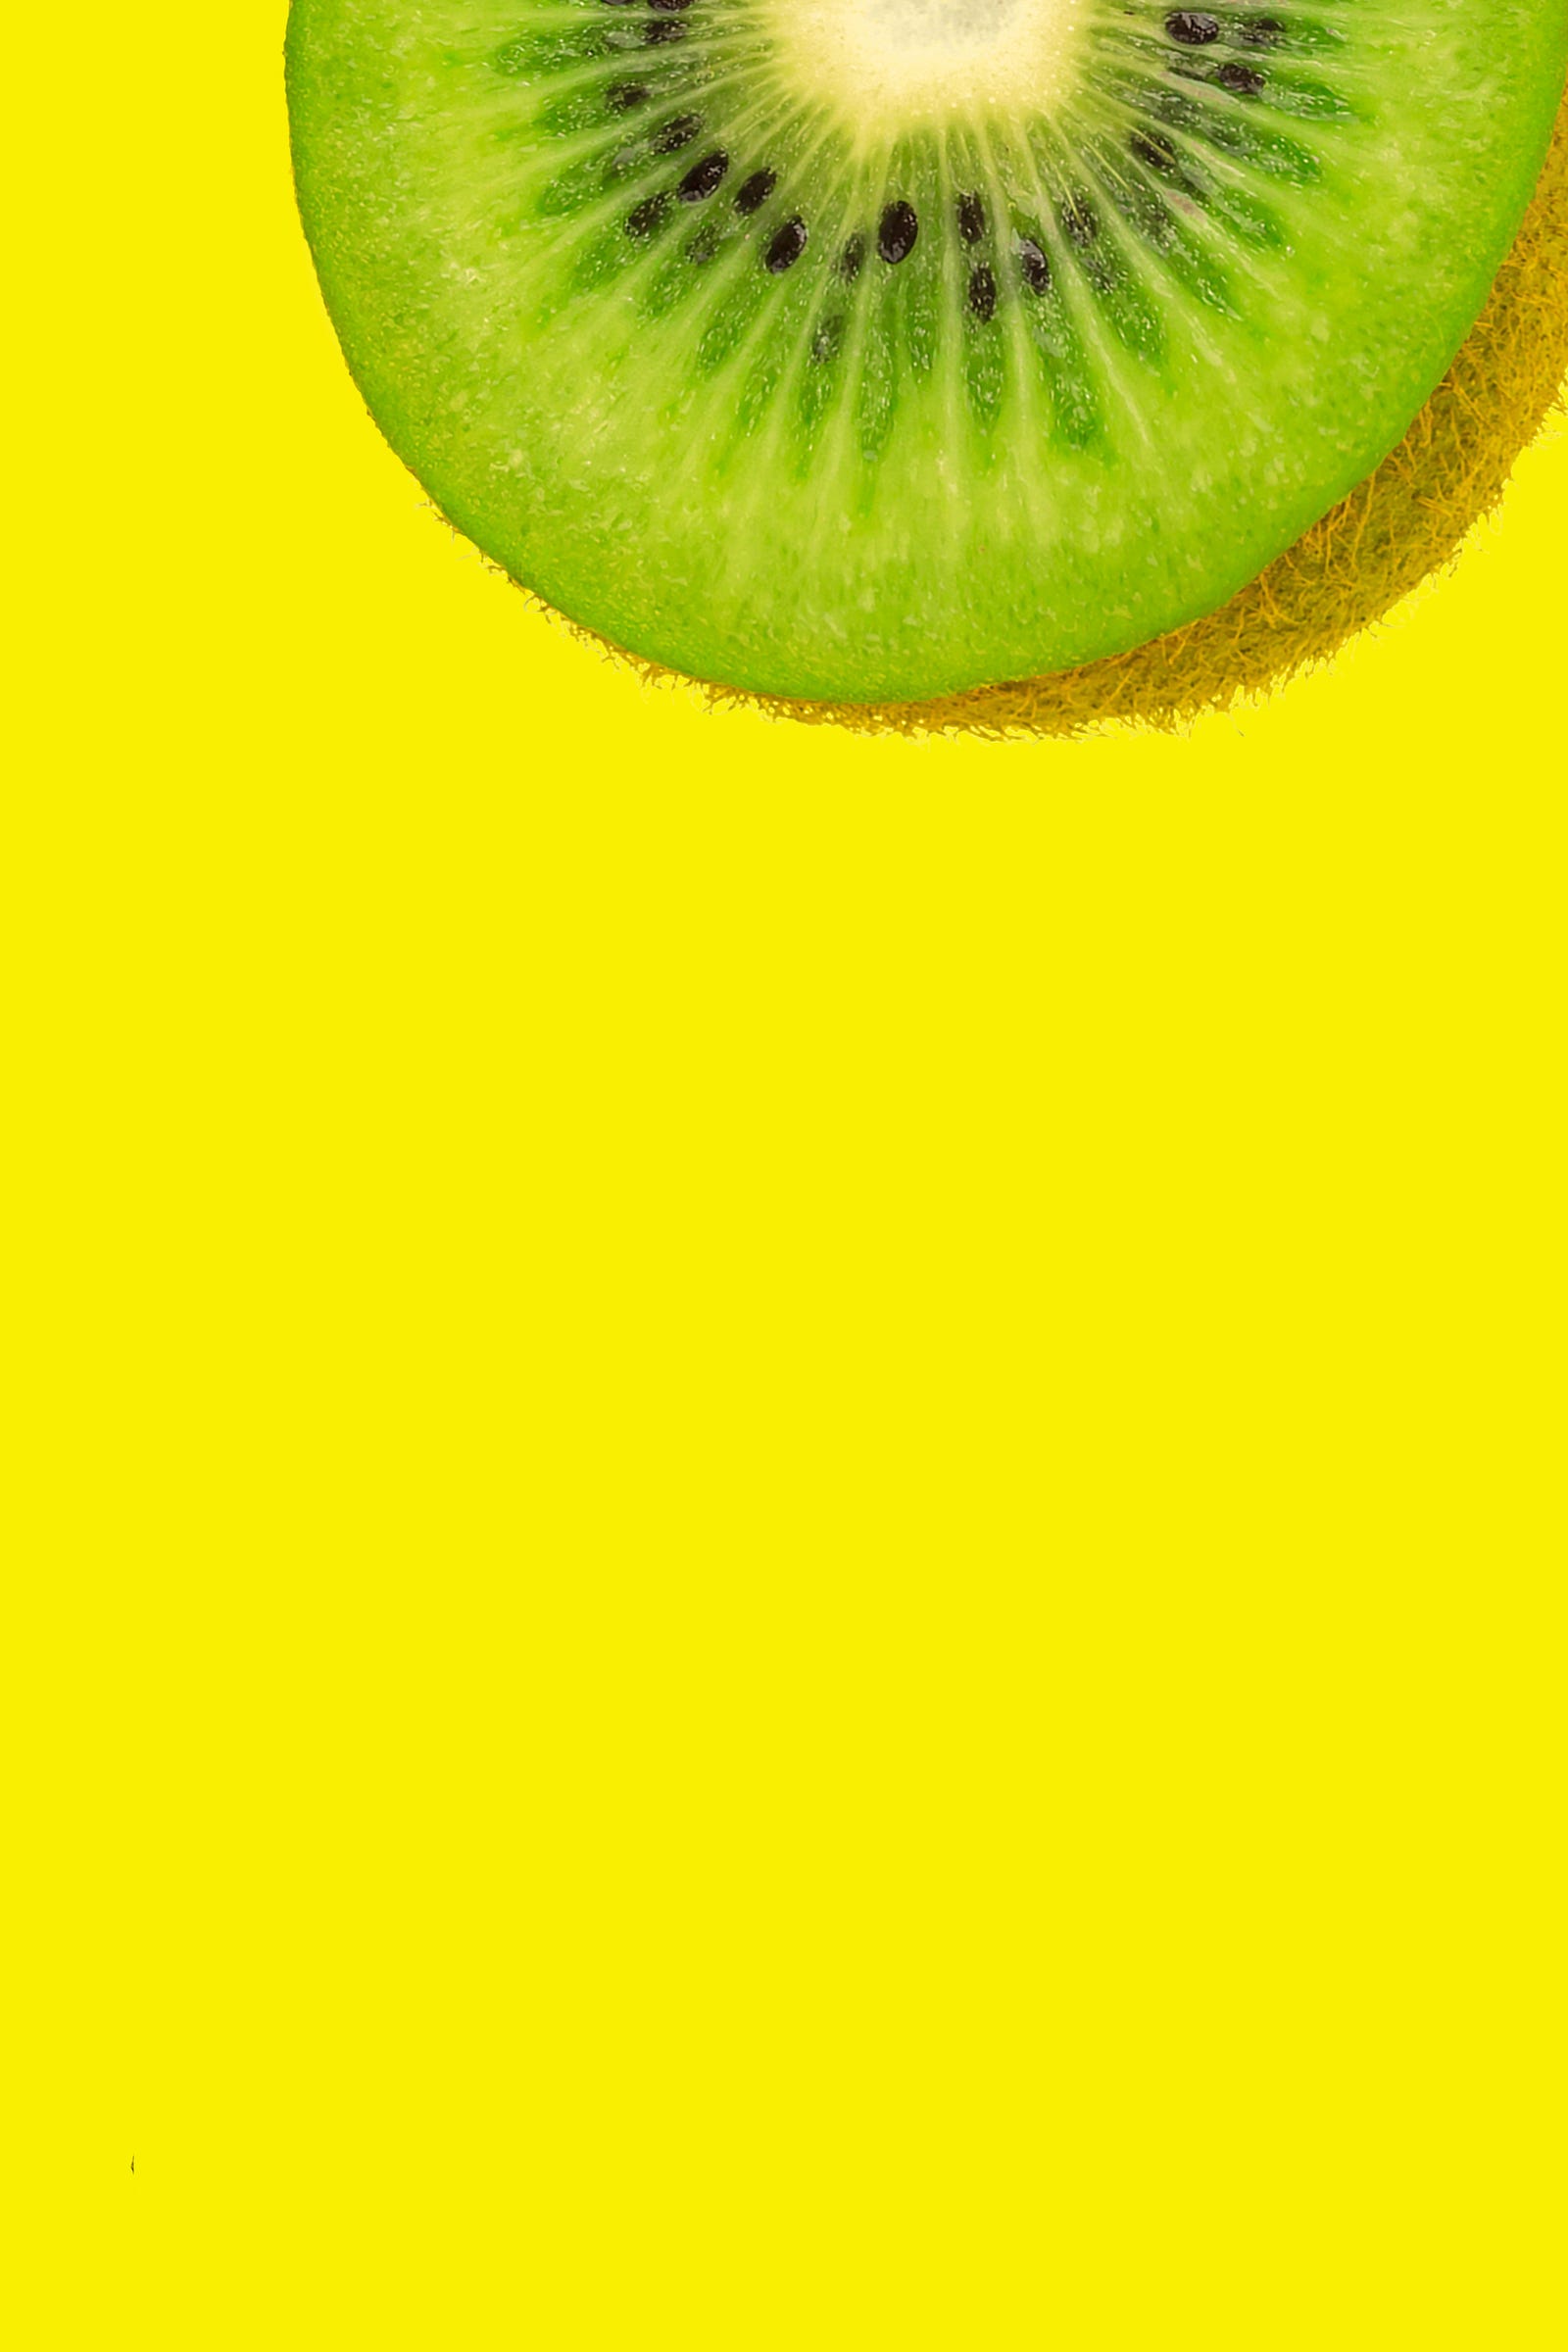 We see half of a slice of kiwi fruit emerging from the image top. Bright yellow background.